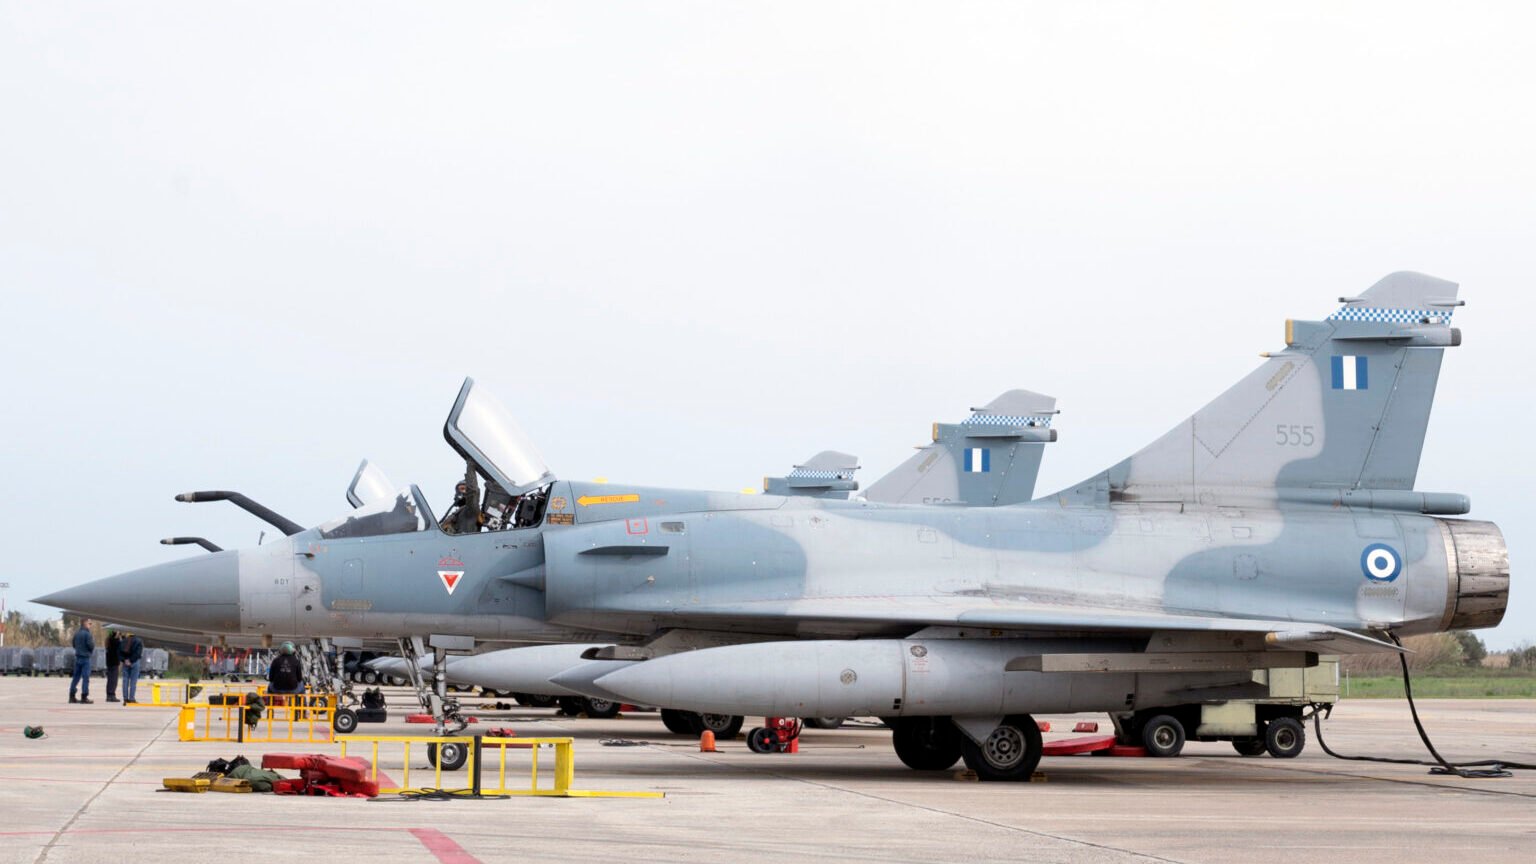 Hellenic Air Force F-16 shares ramp with U.S. Air Force F-15E